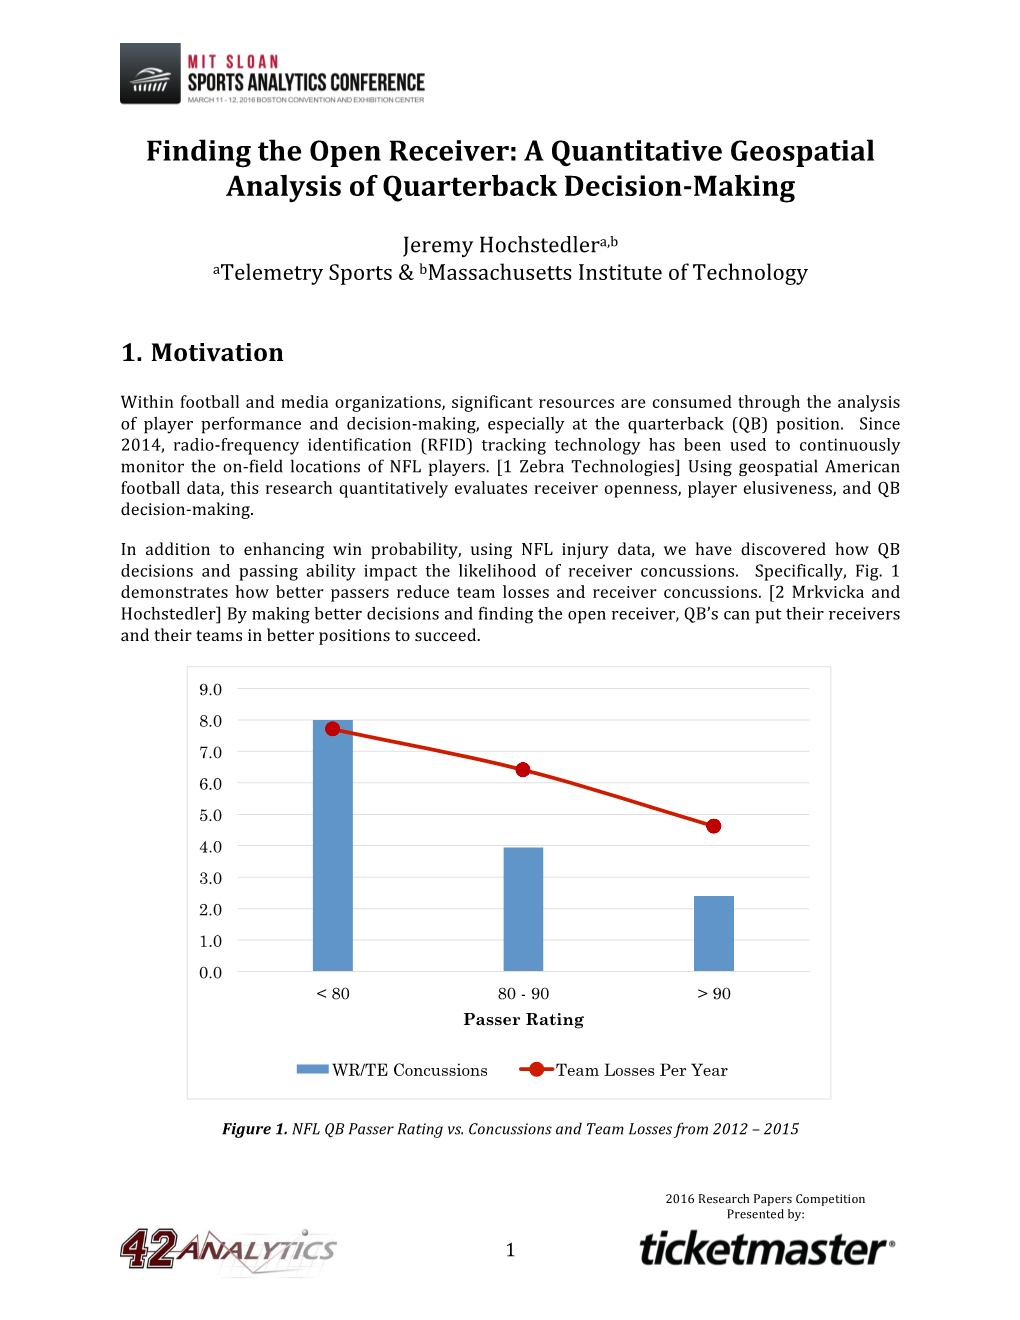 Finding the Open Receiver: a Quantitative Geospatial Analysis of Quarterback Decision-Making